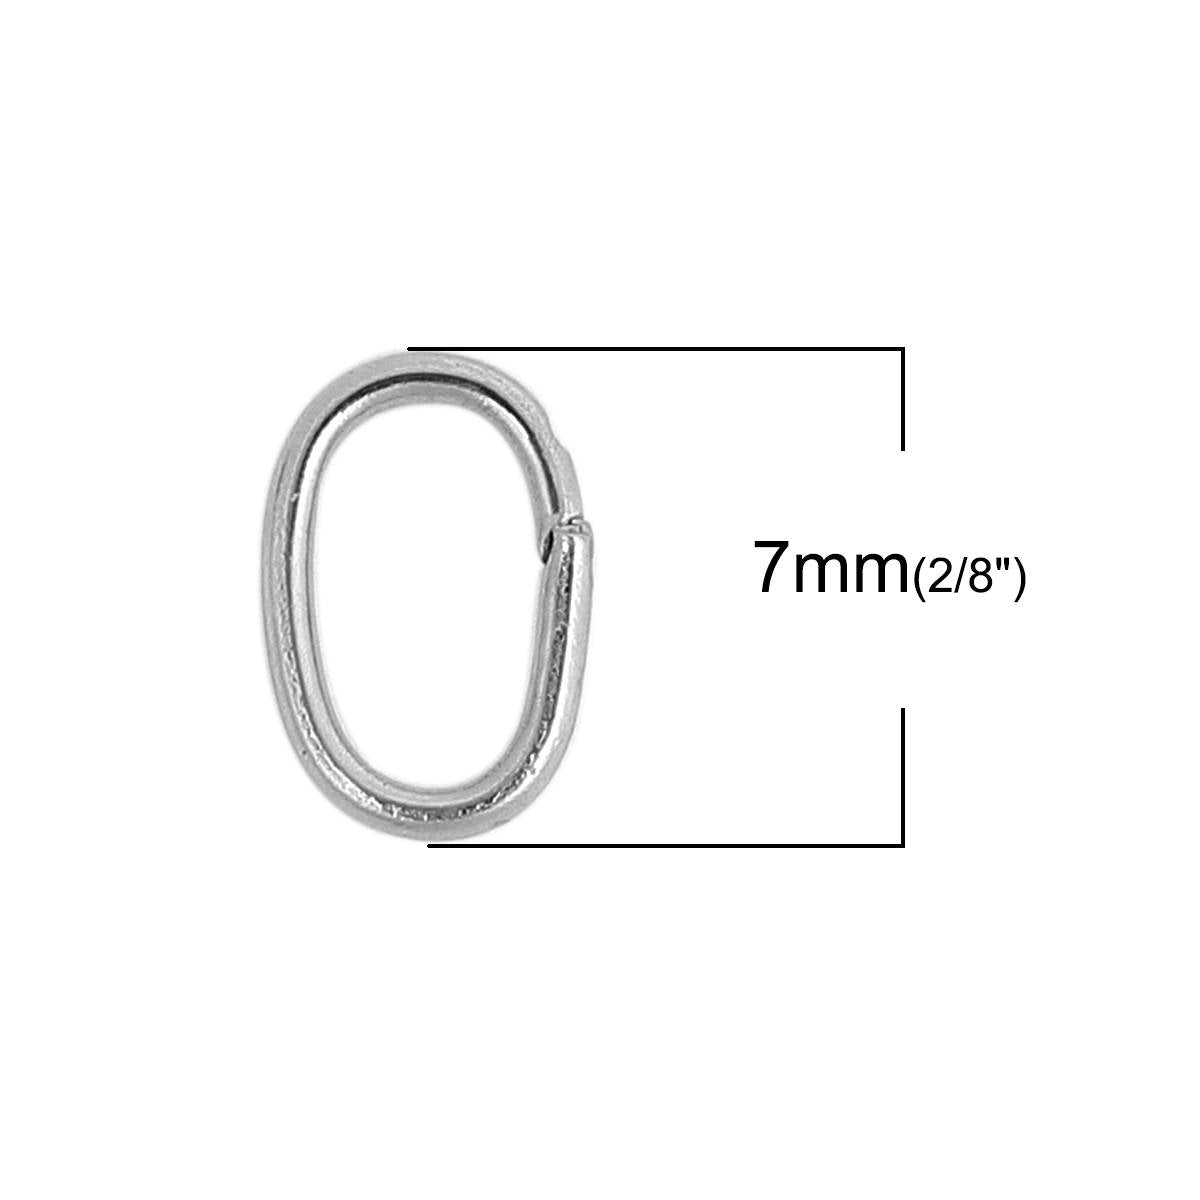 Stainless steel oval jump rings 7, 8 or 10mm